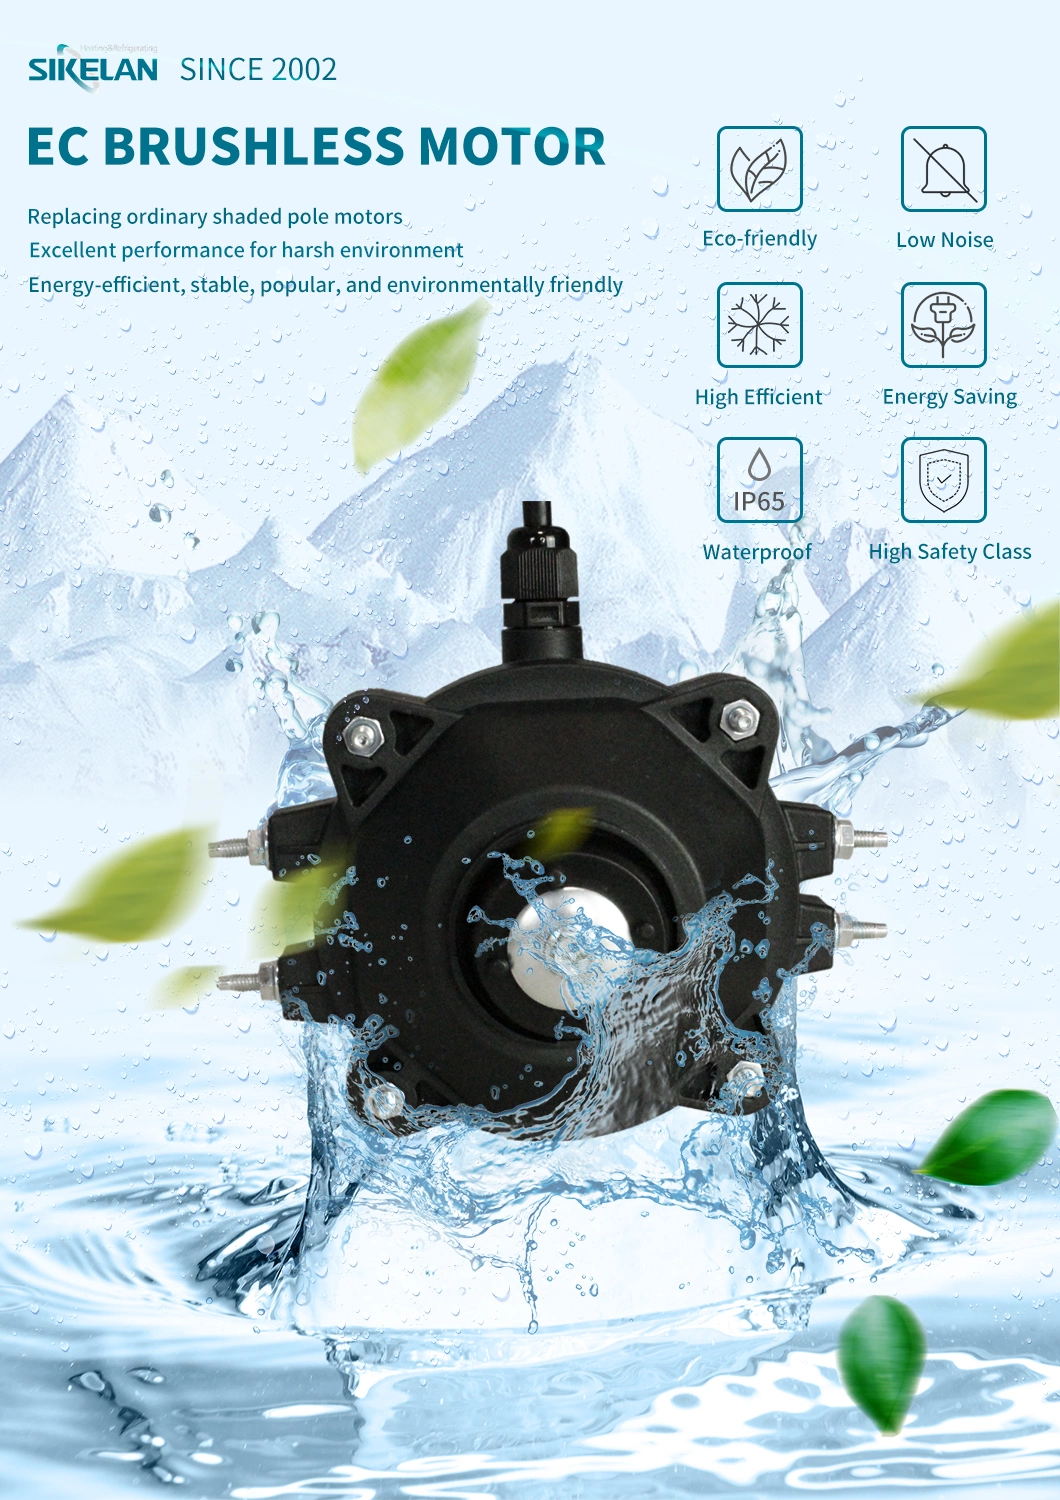 Low Energy Consumption Efficiency Refrigeration Cooling Ec Brushless Motor